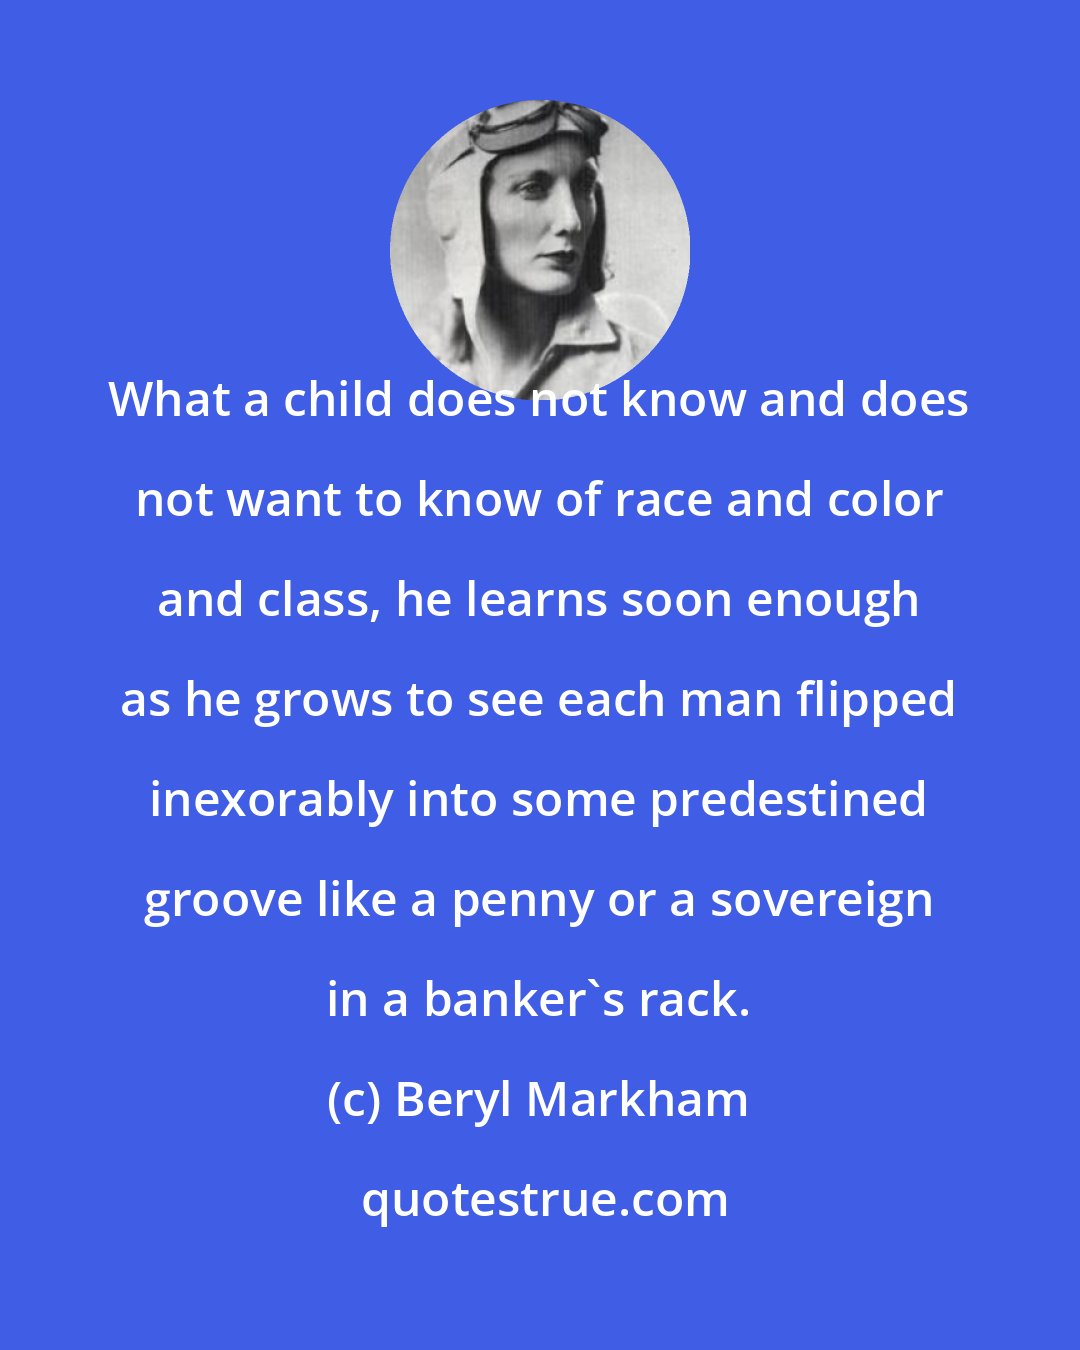 Beryl Markham: What a child does not know and does not want to know of race and color and class, he learns soon enough as he grows to see each man flipped inexorably into some predestined groove like a penny or a sovereign in a banker's rack.